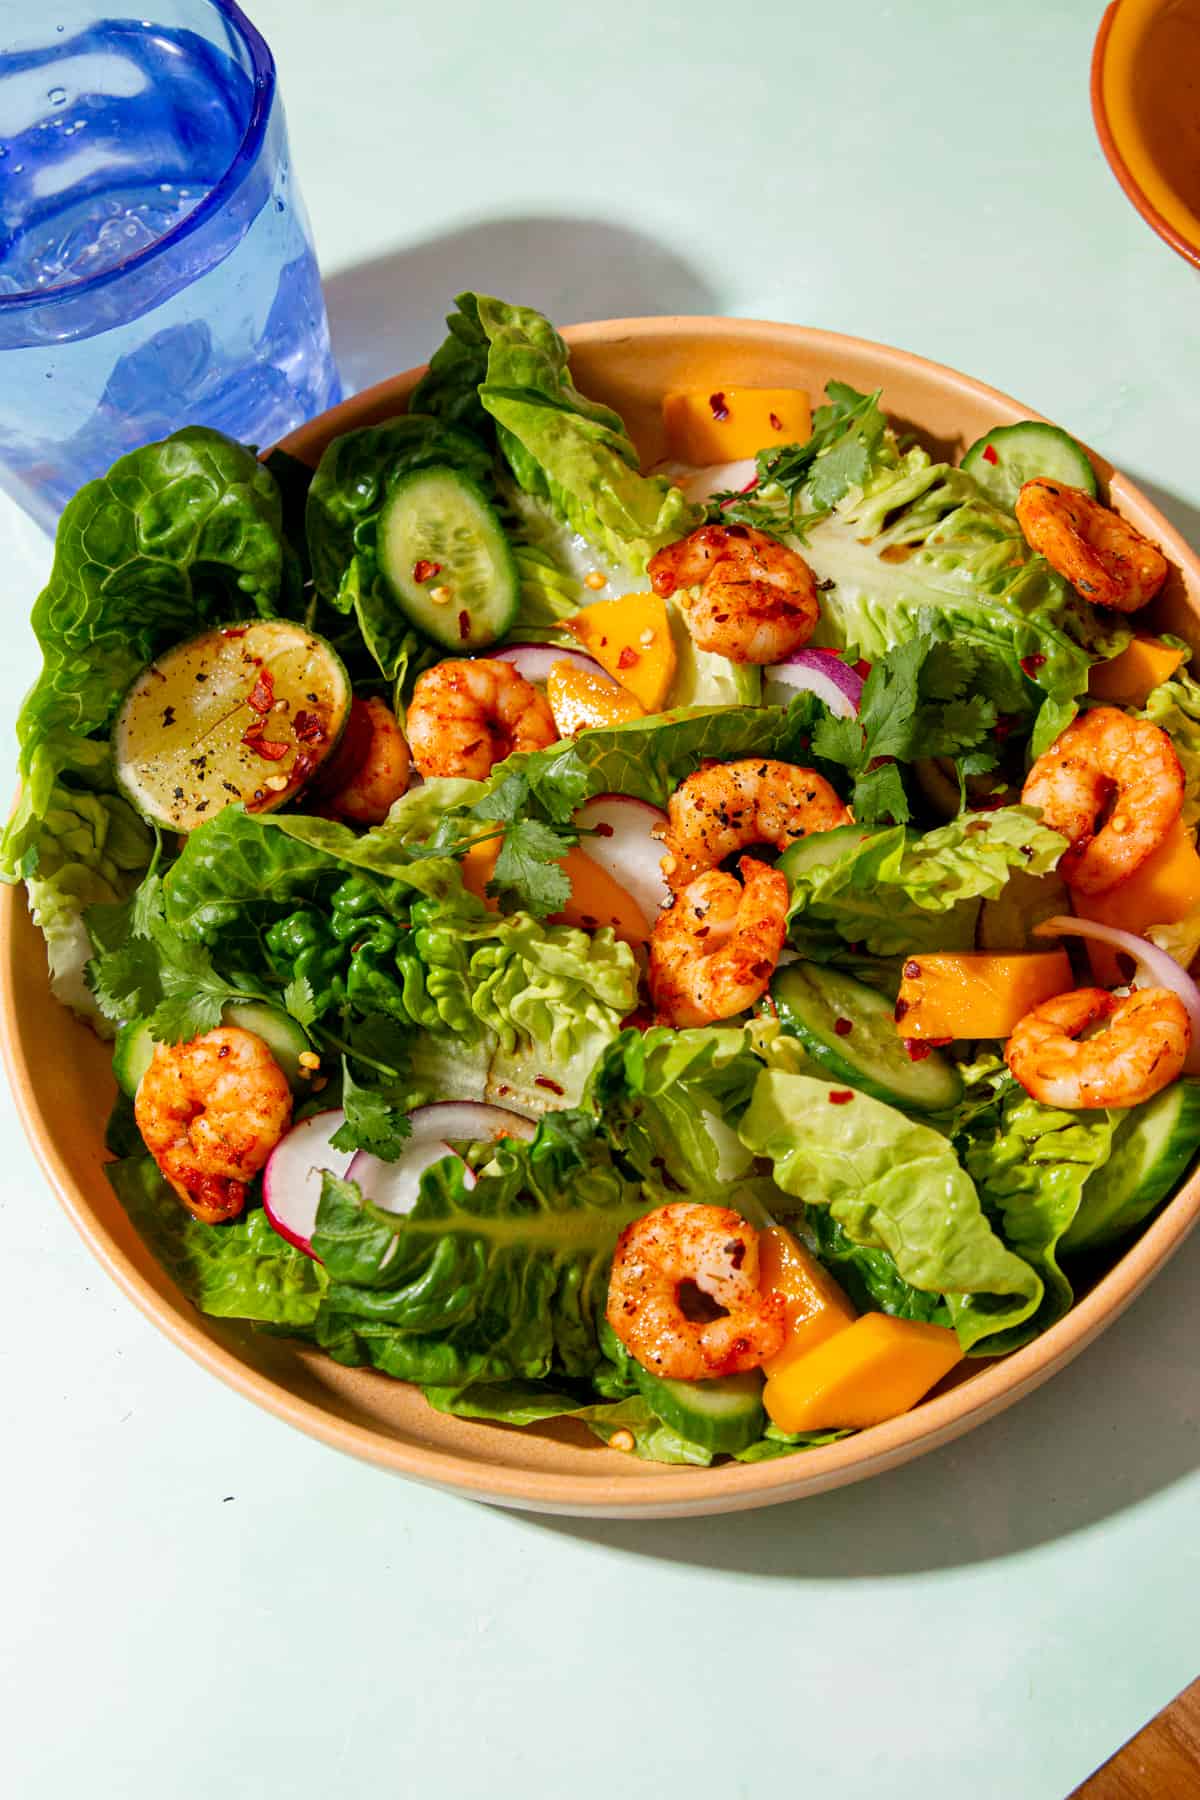 Golden browned king prawns in a bowl of salad with sliced cucumber, radished and red onion next to a blue glass of water.